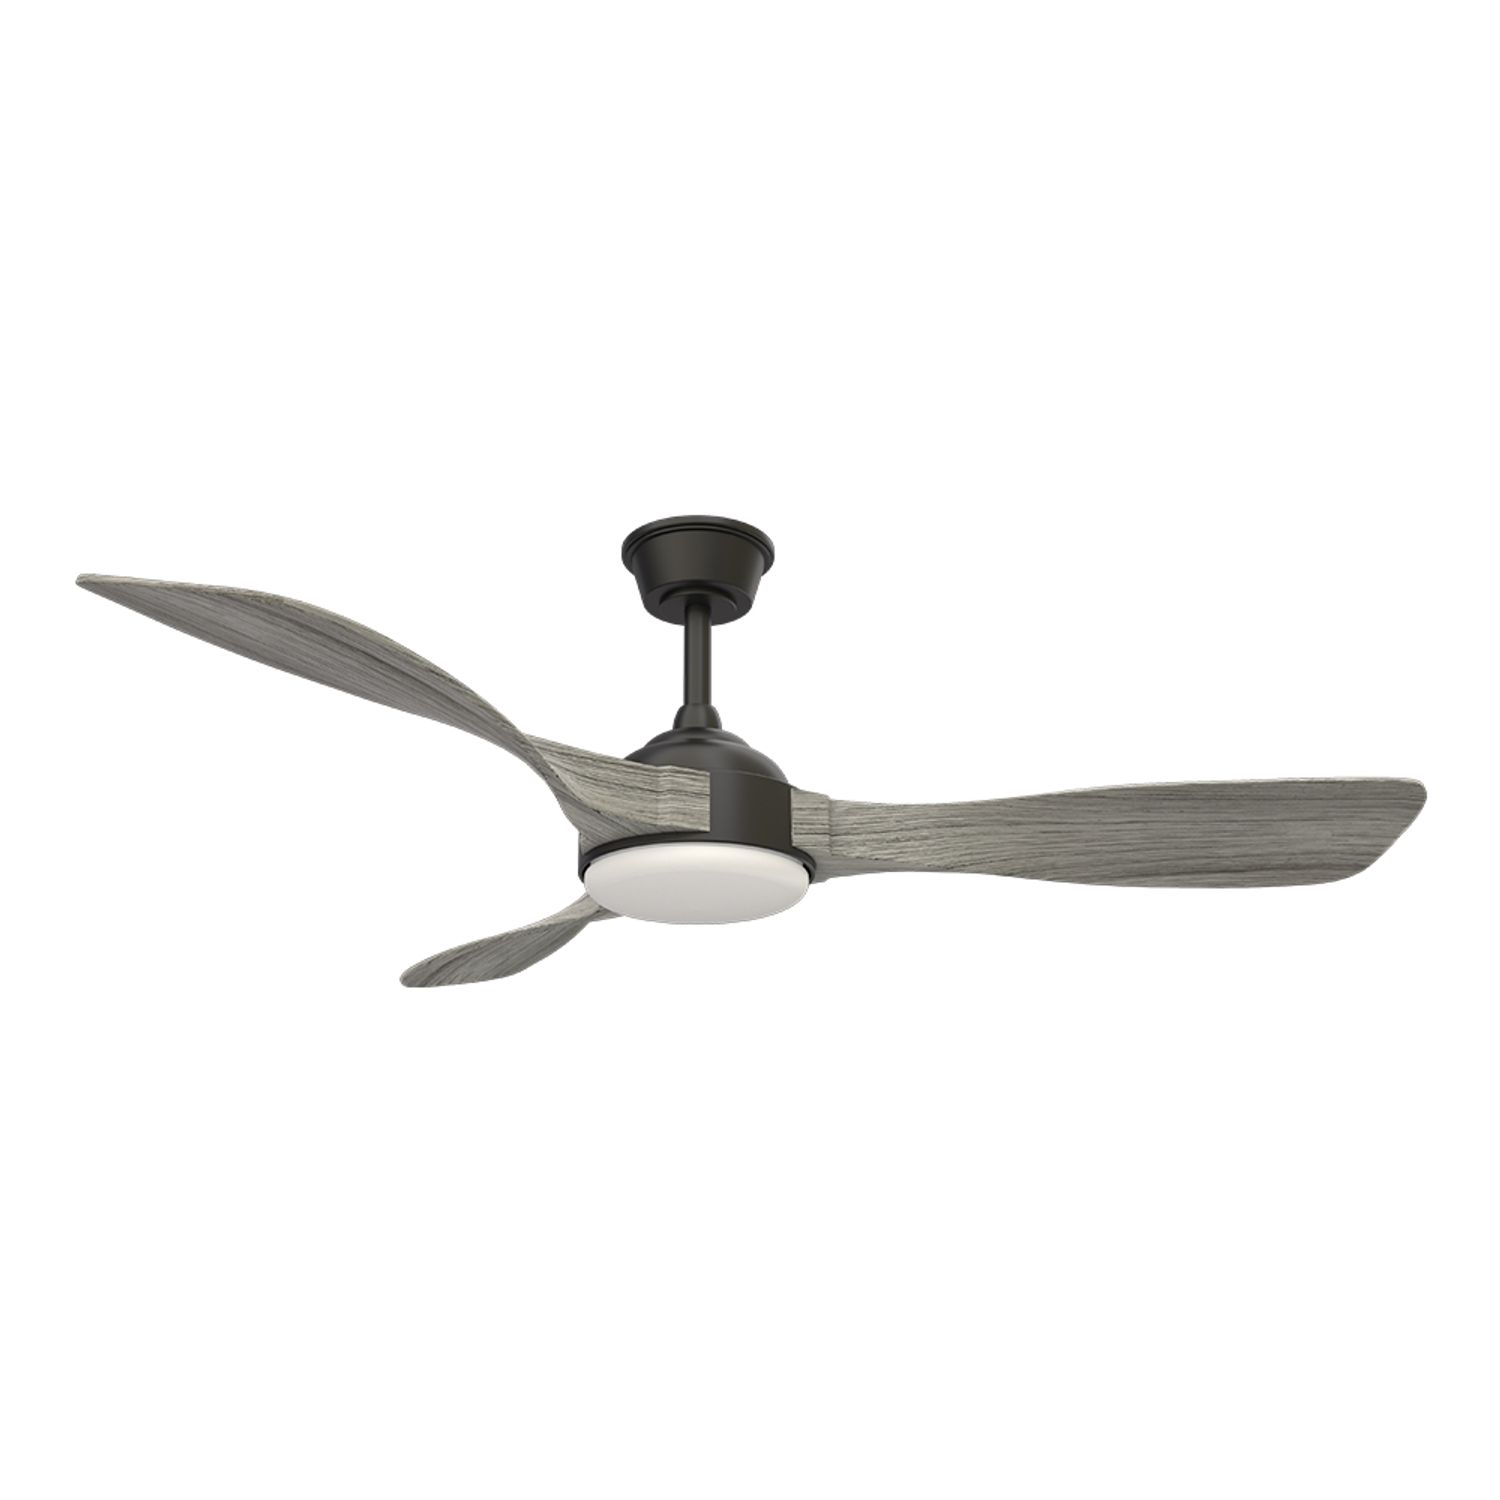 KBS grey real wood indoor tropical ceiling fans with lights